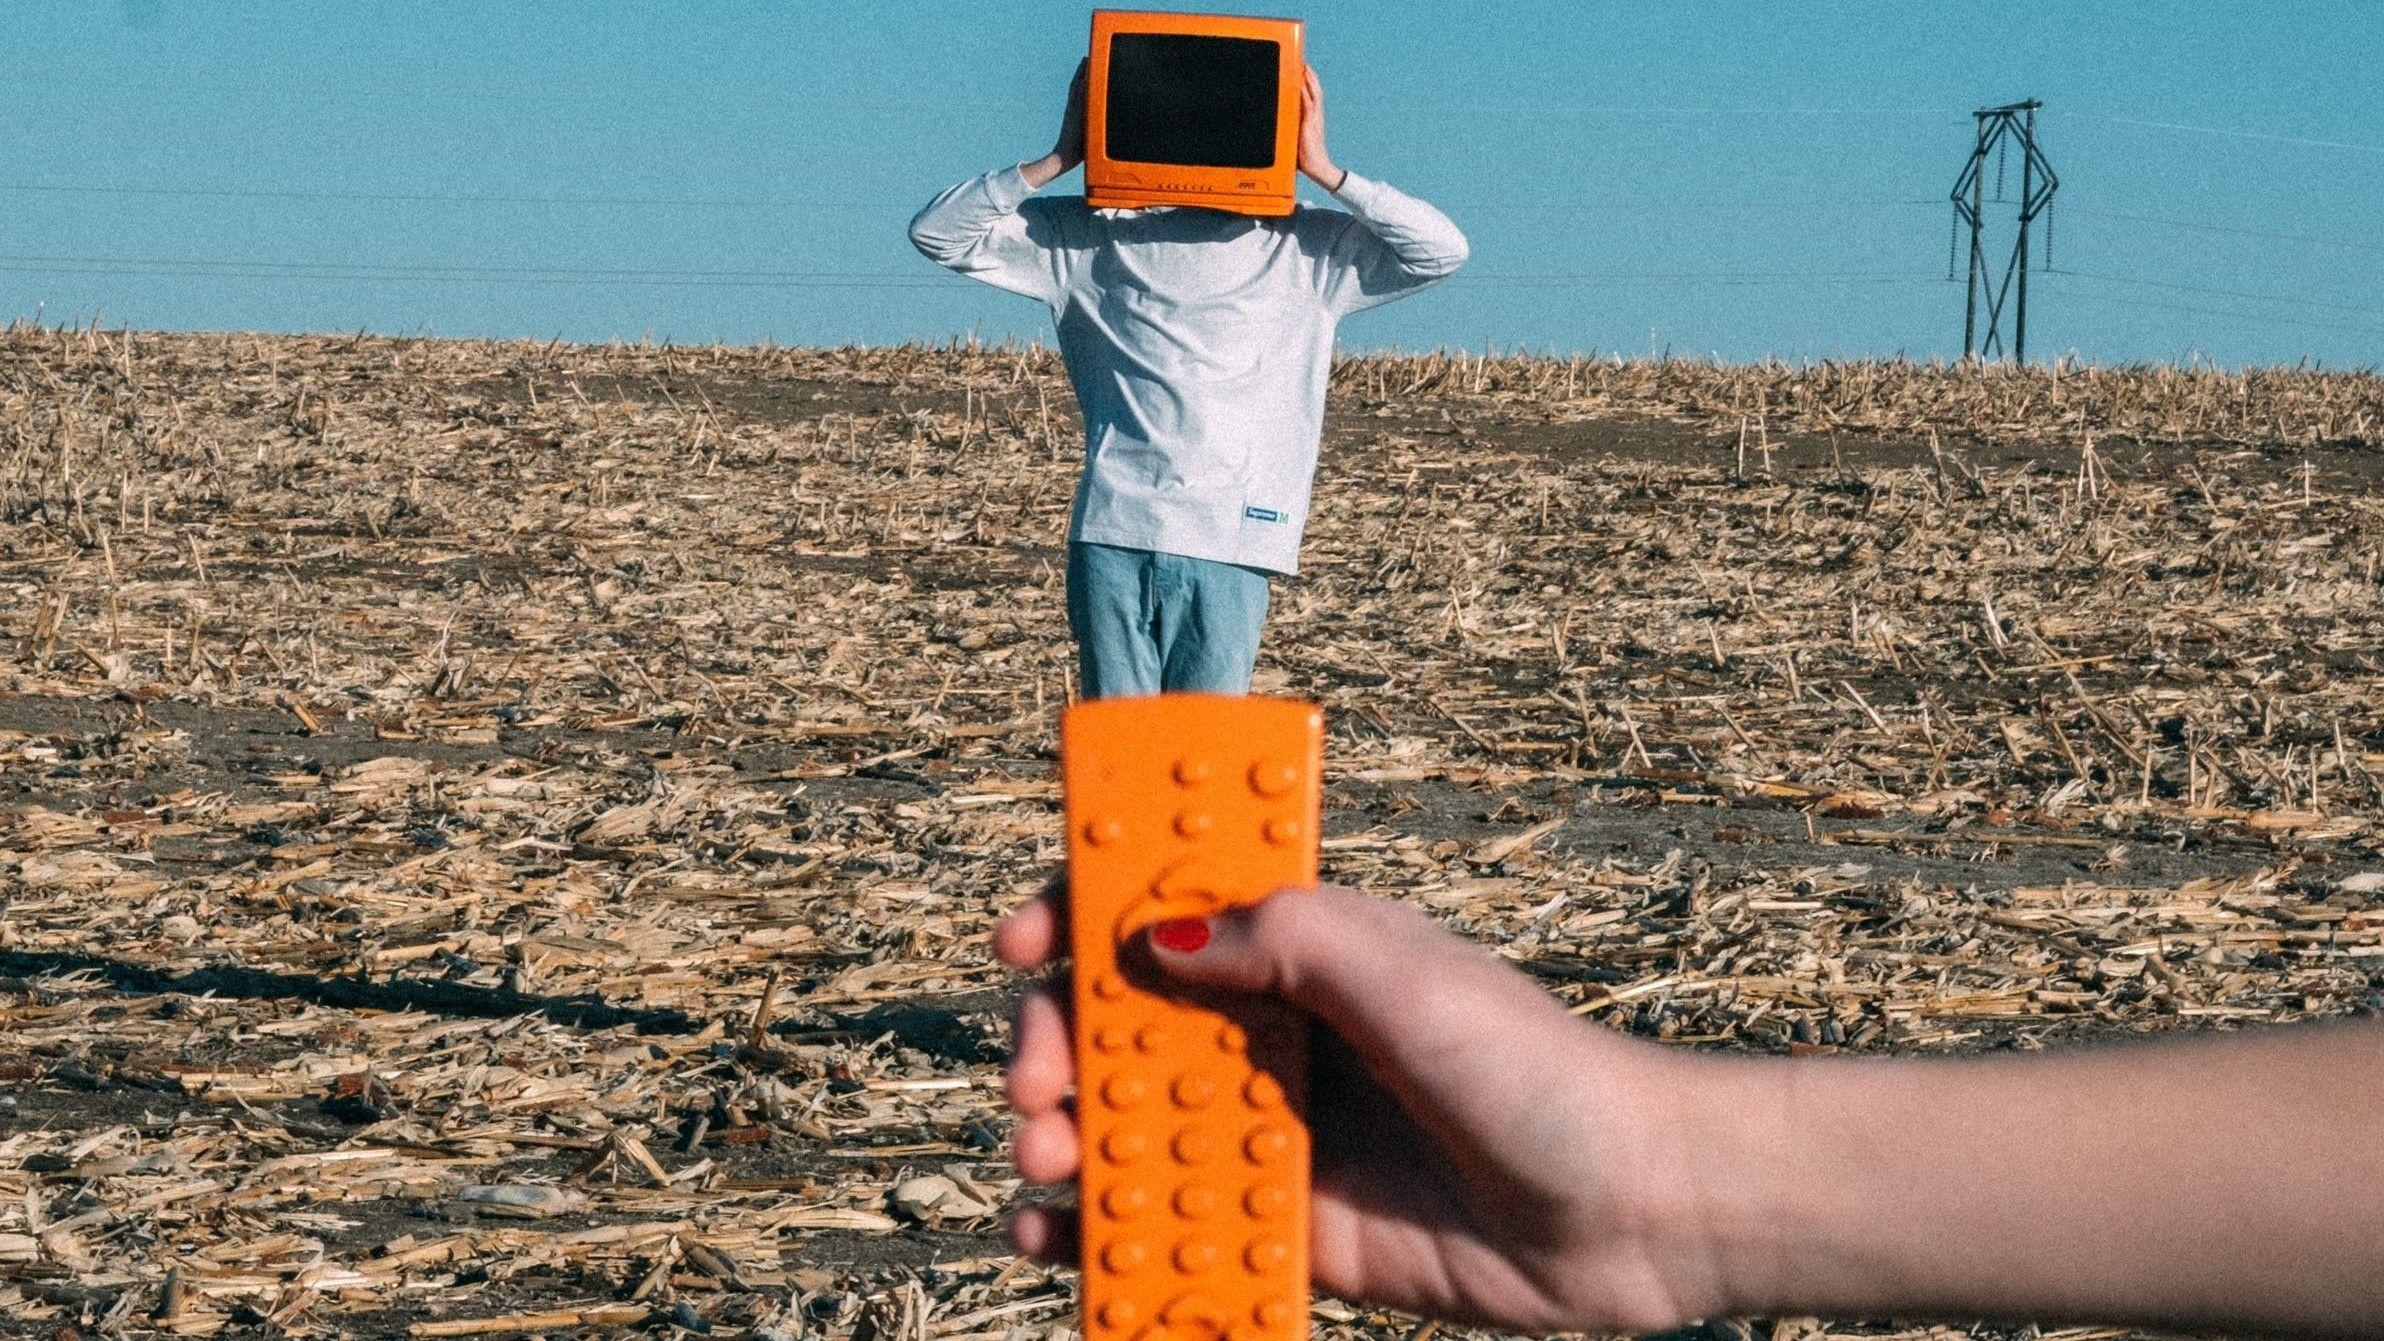 A person is standing on a harvested crops field and wears a TV on his head. A hand holds an orange remote control